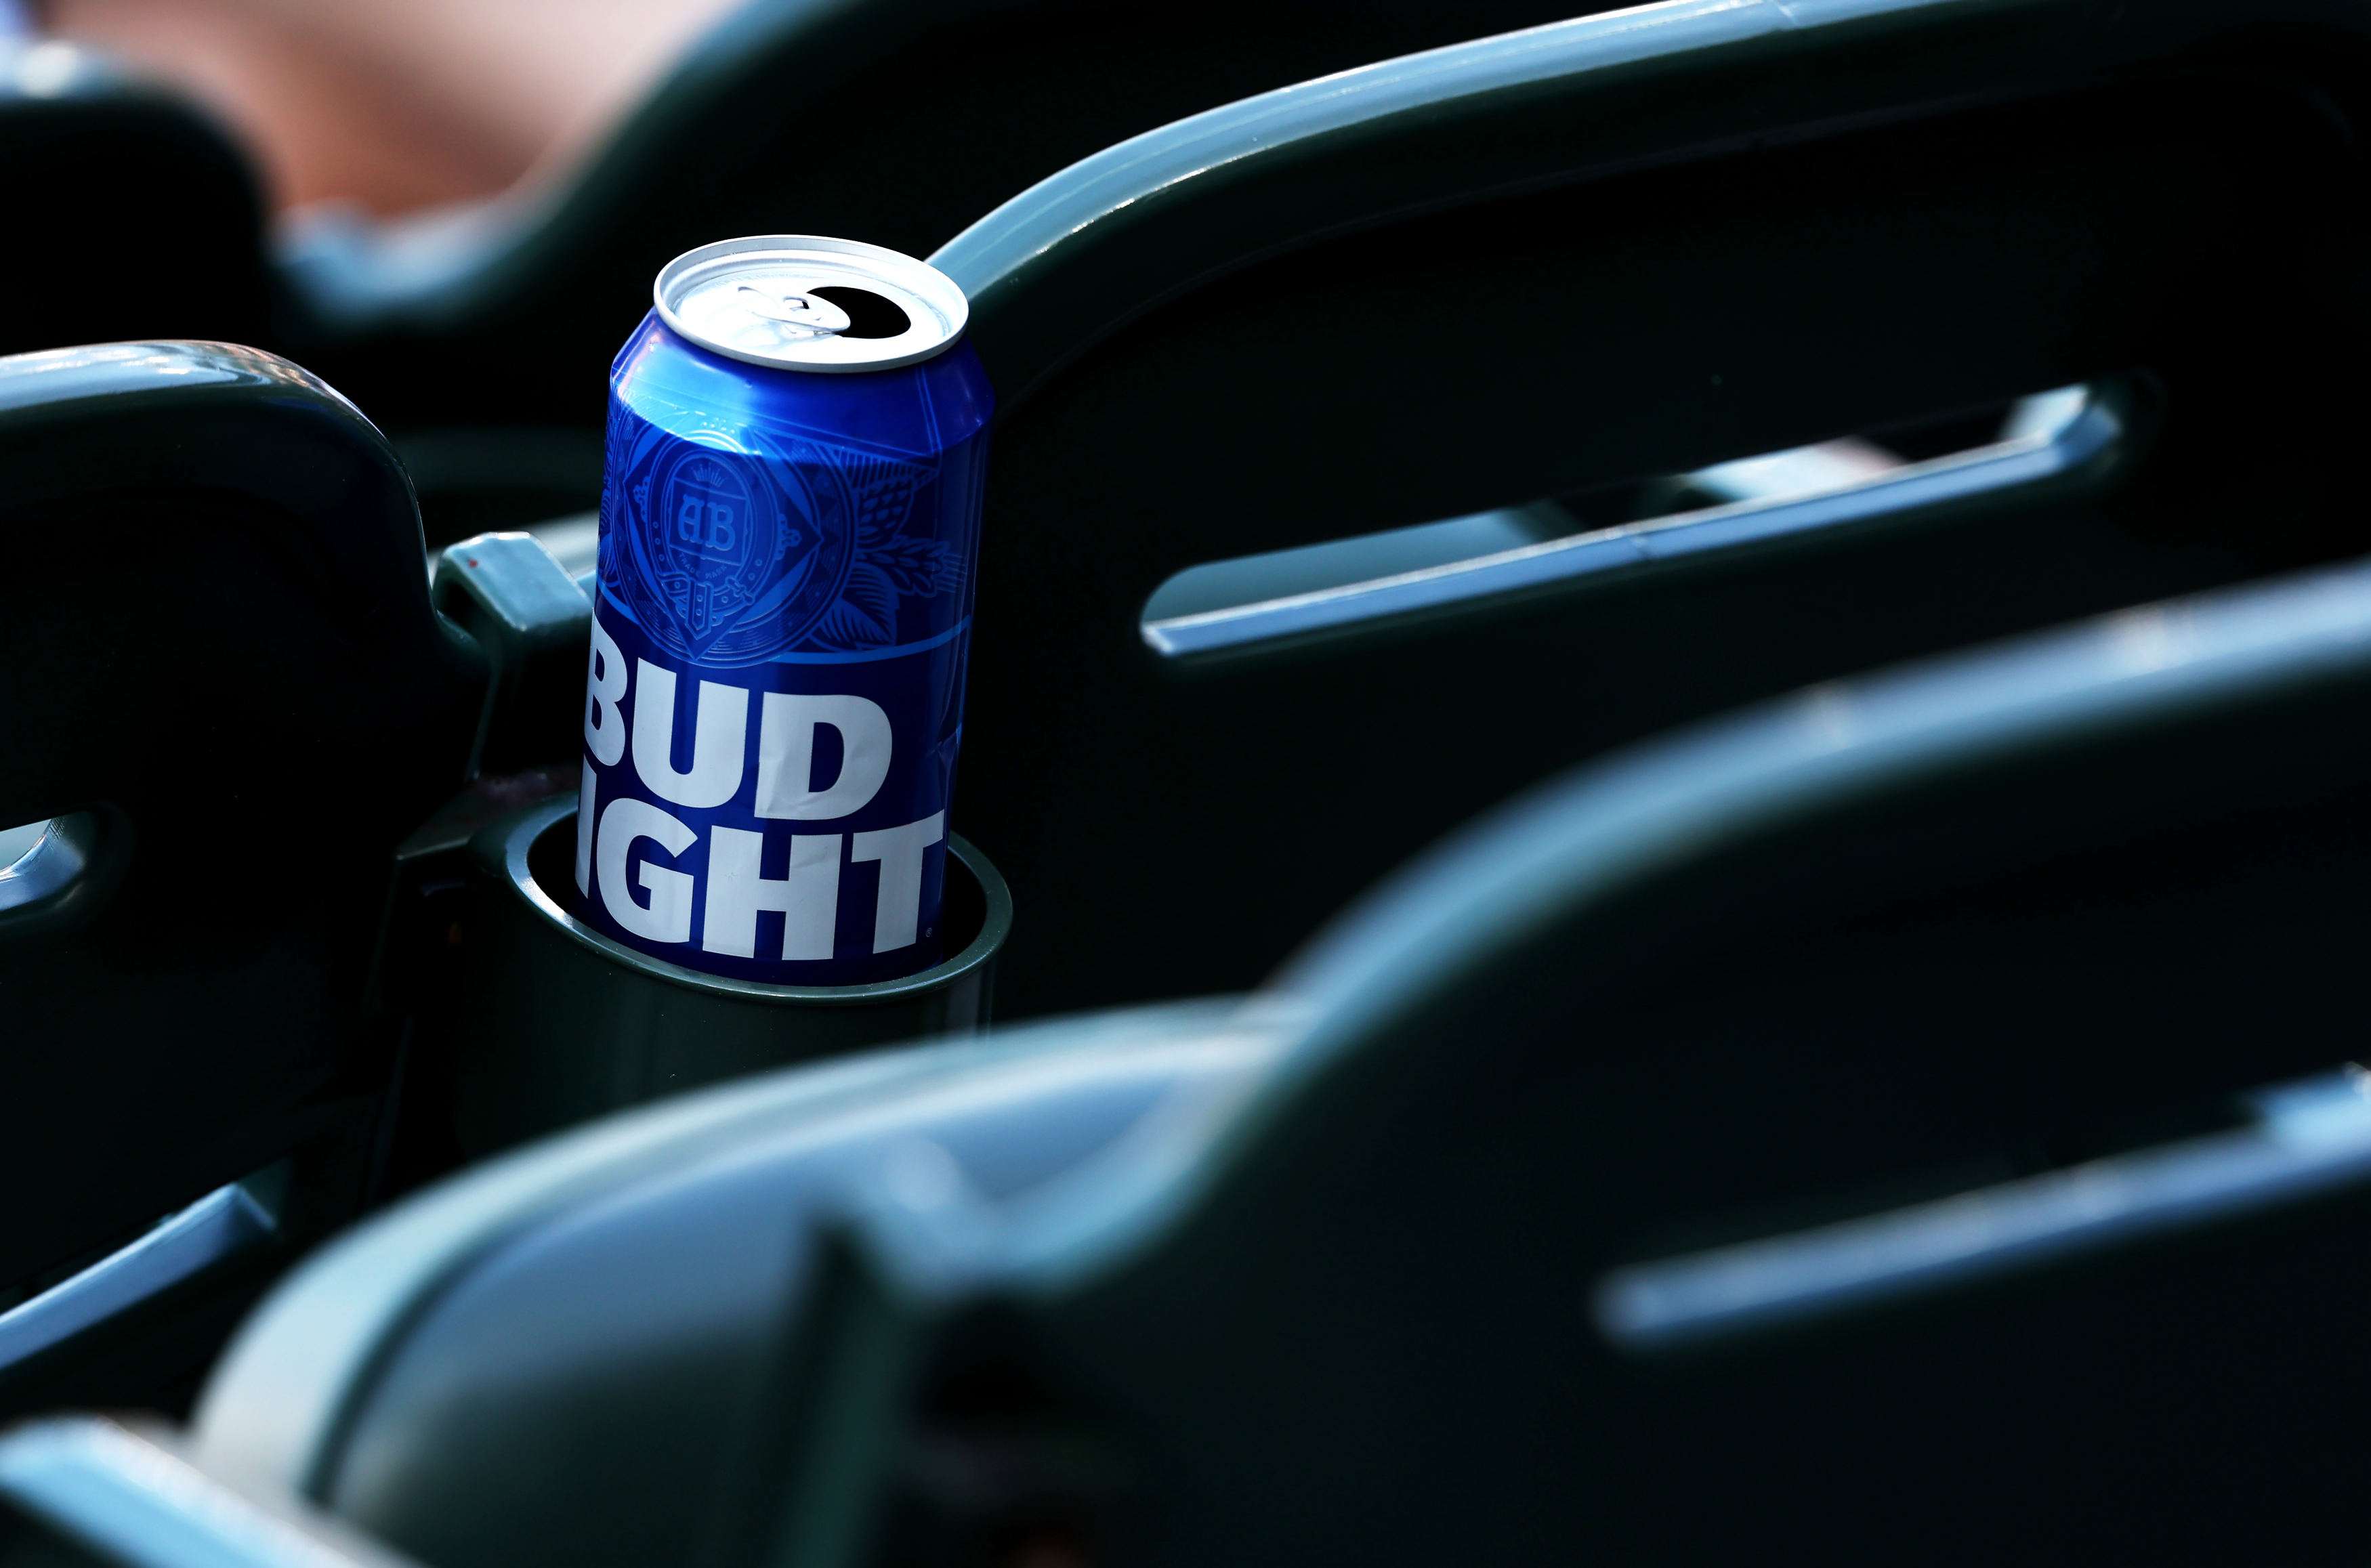 Bud Light mocked for own tweet: “It’s going great”